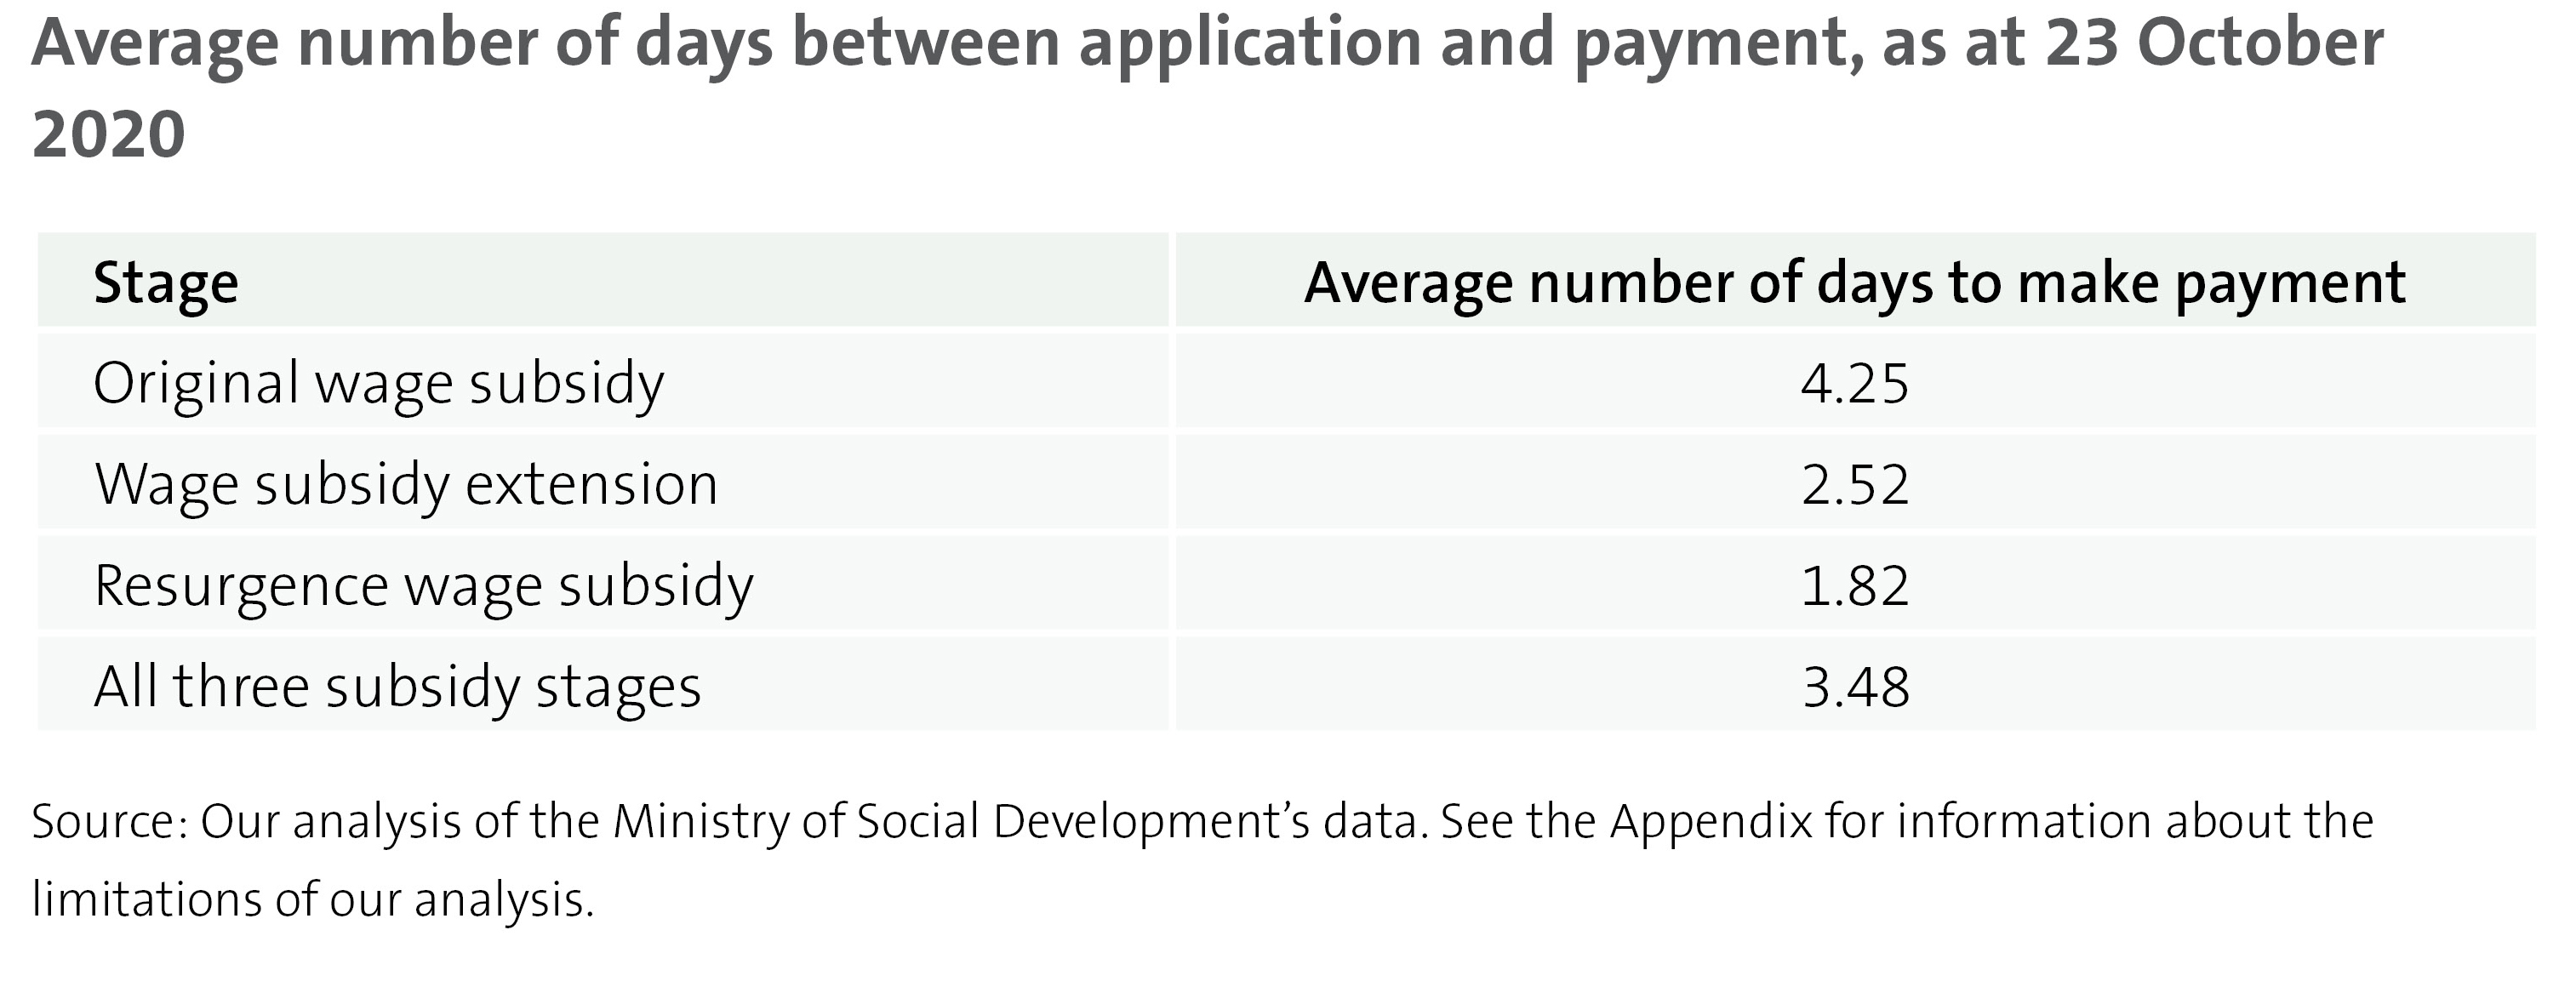 Figure 5 - Average number of days between application and payment, as at 23 October 2020